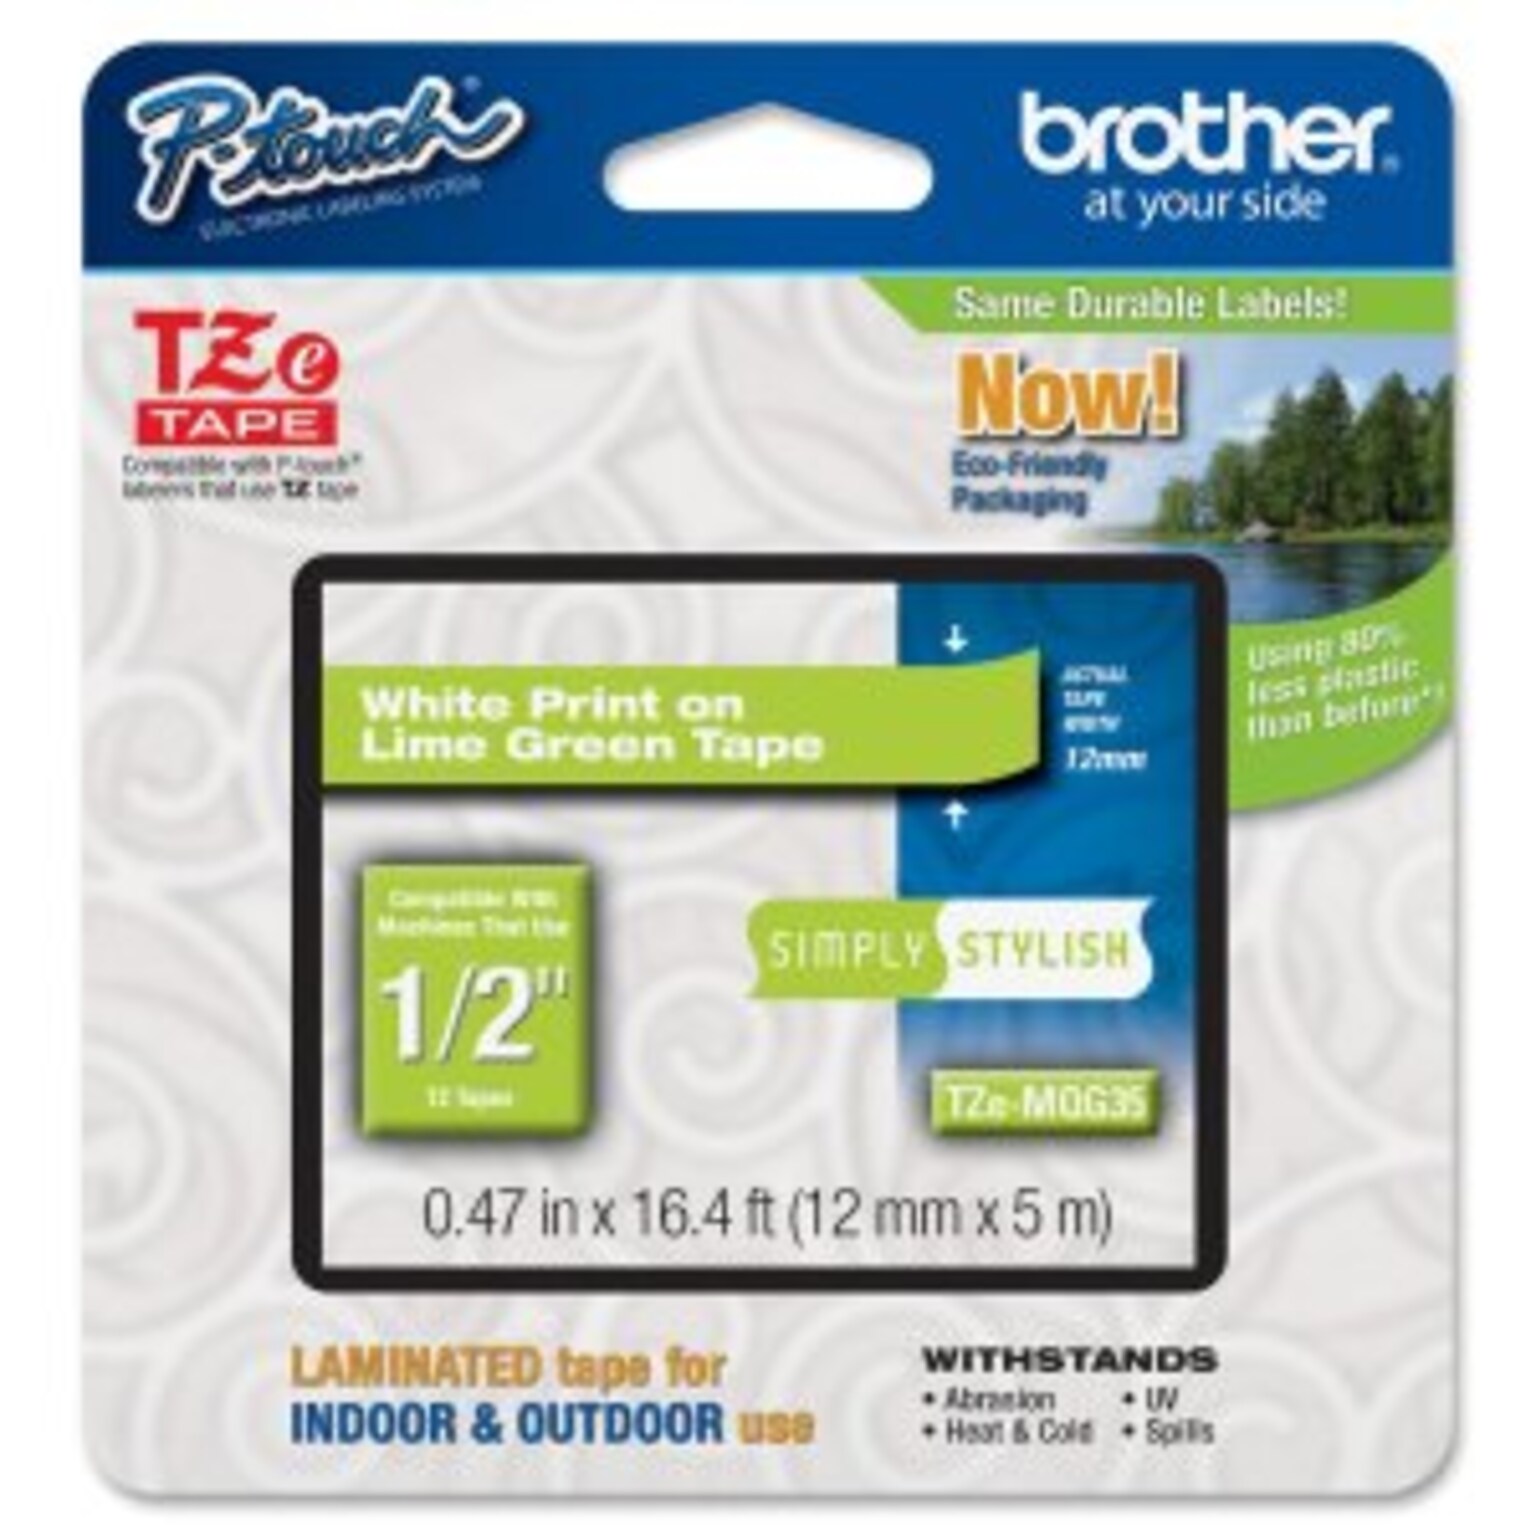 Brother P-touch TZe-MQG35 Laminated Label Maker Tape, 1/2 x 16-4/10, White on Lime Green (TZe-MQG35)